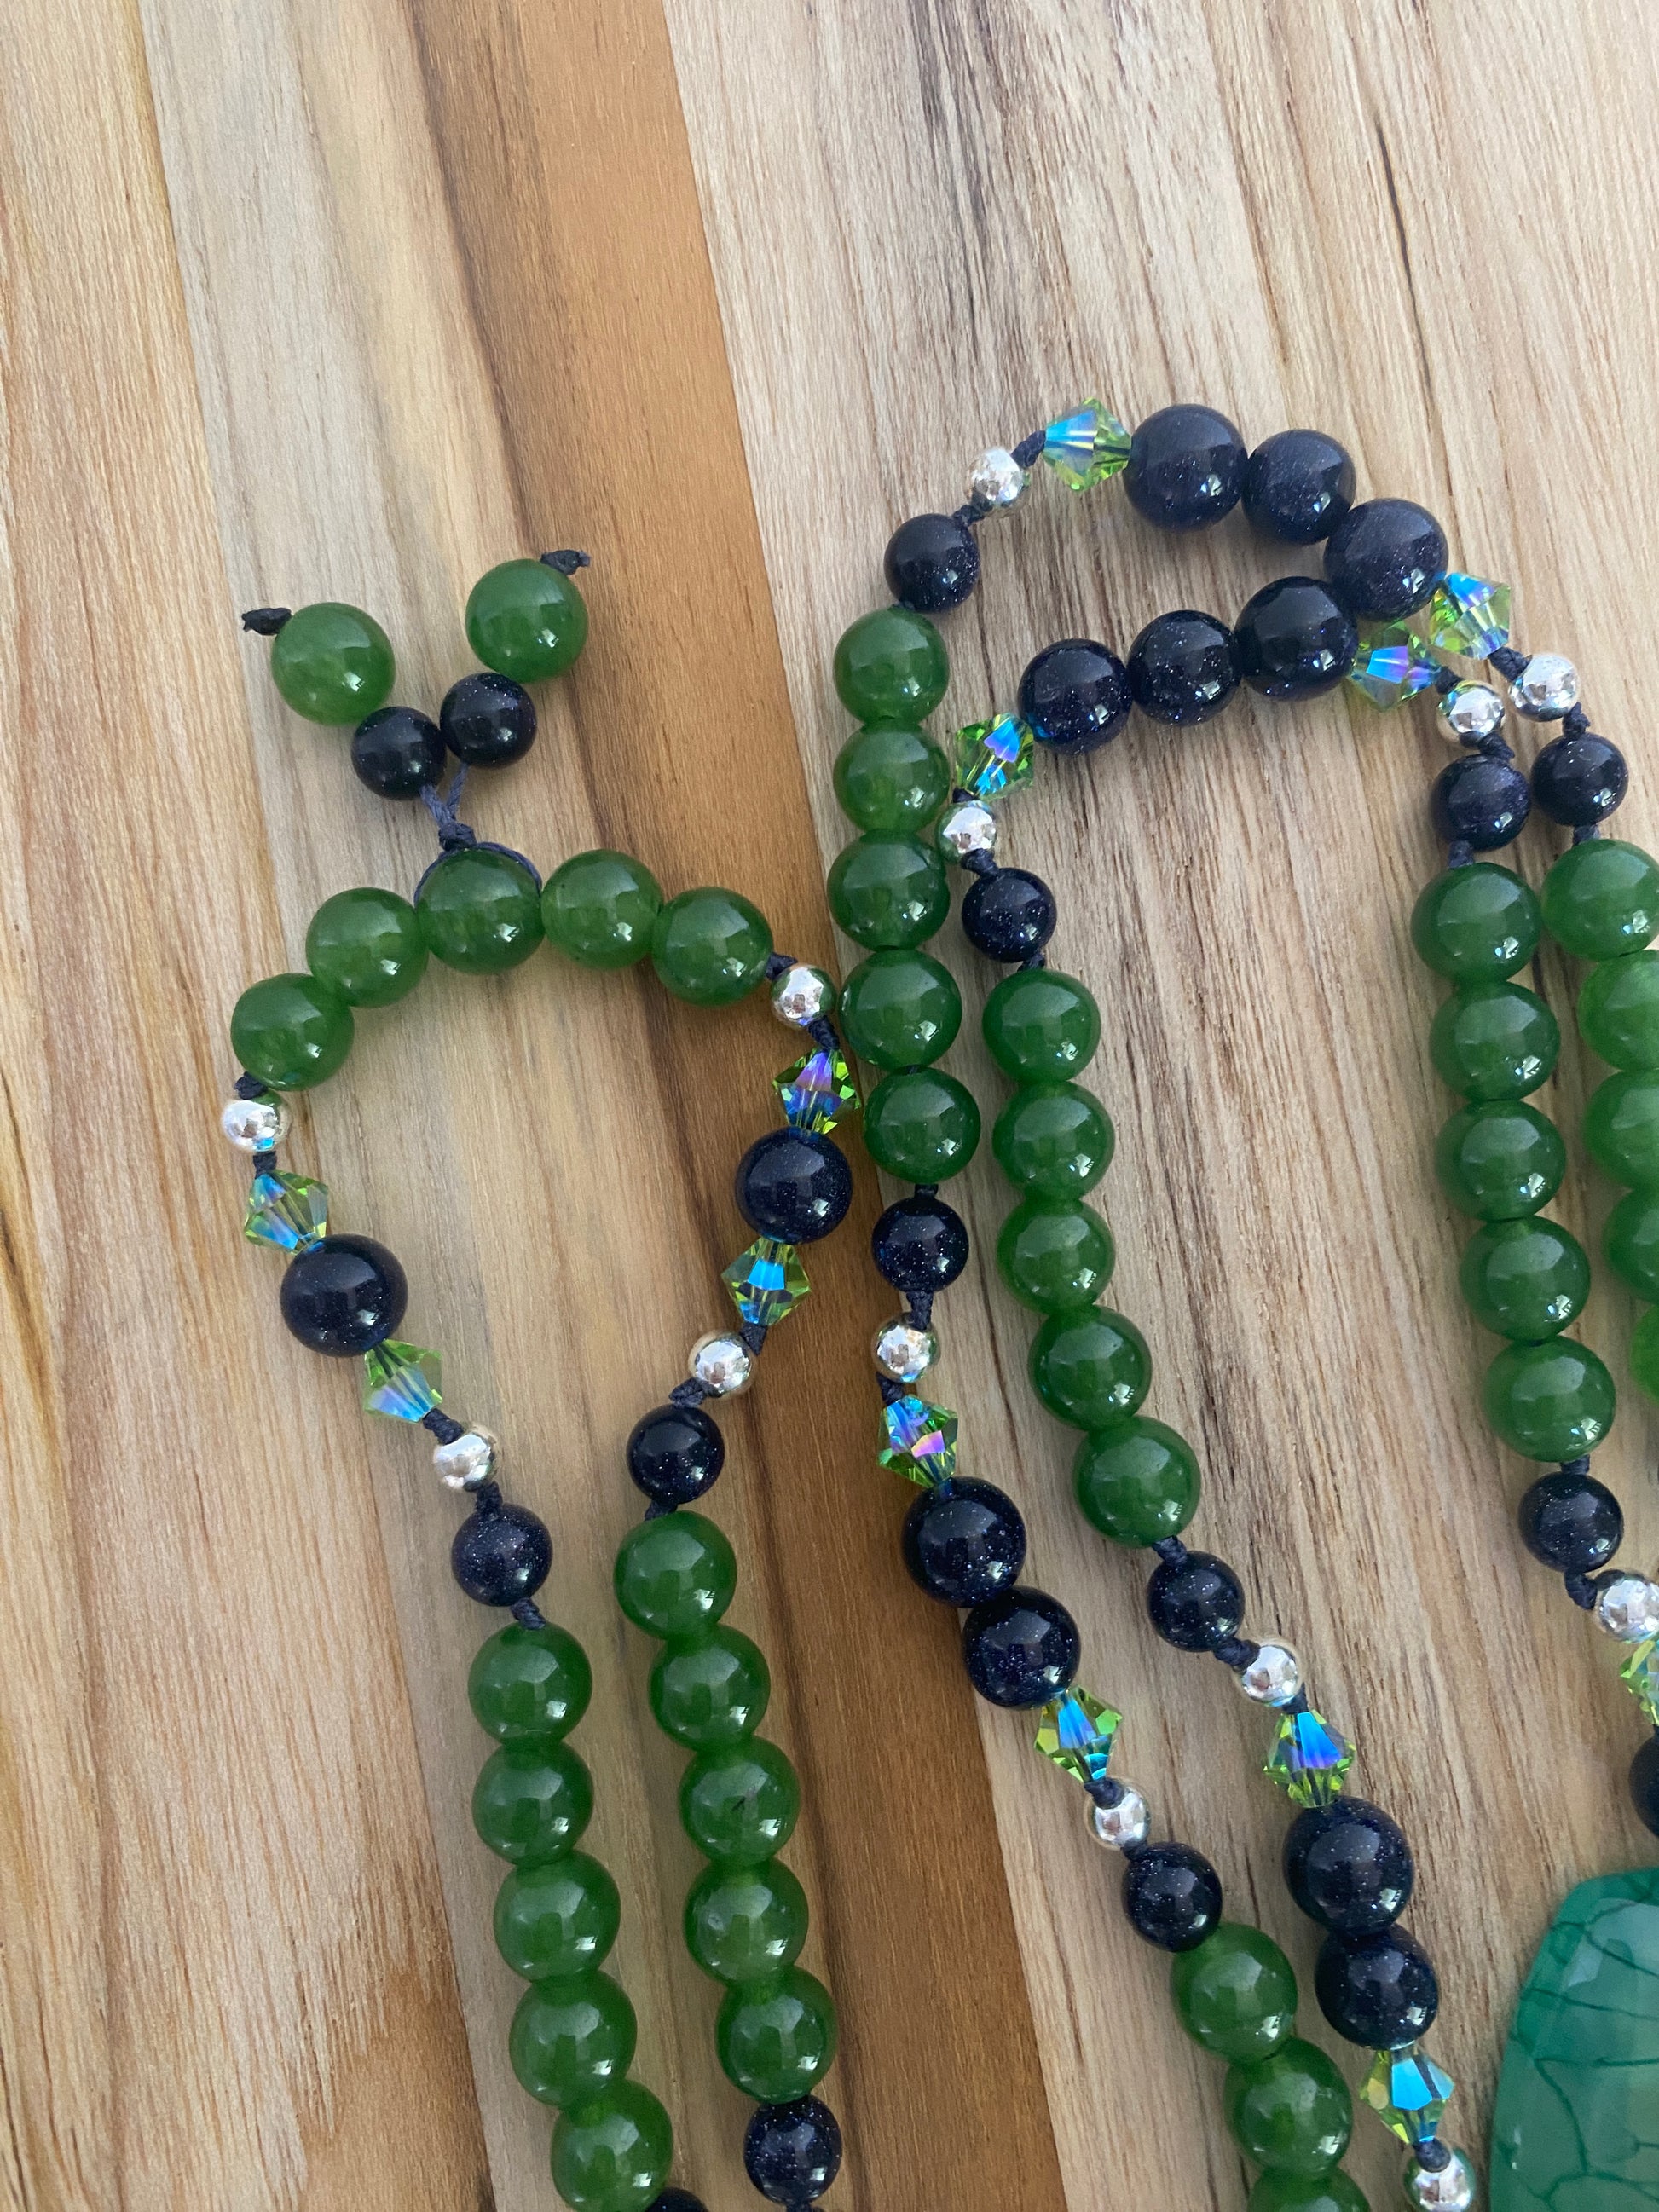 30" Green Agate Beaded Pendant Necklace with Blue Sandstone, Green Jade & Crystals - My Urban Gems